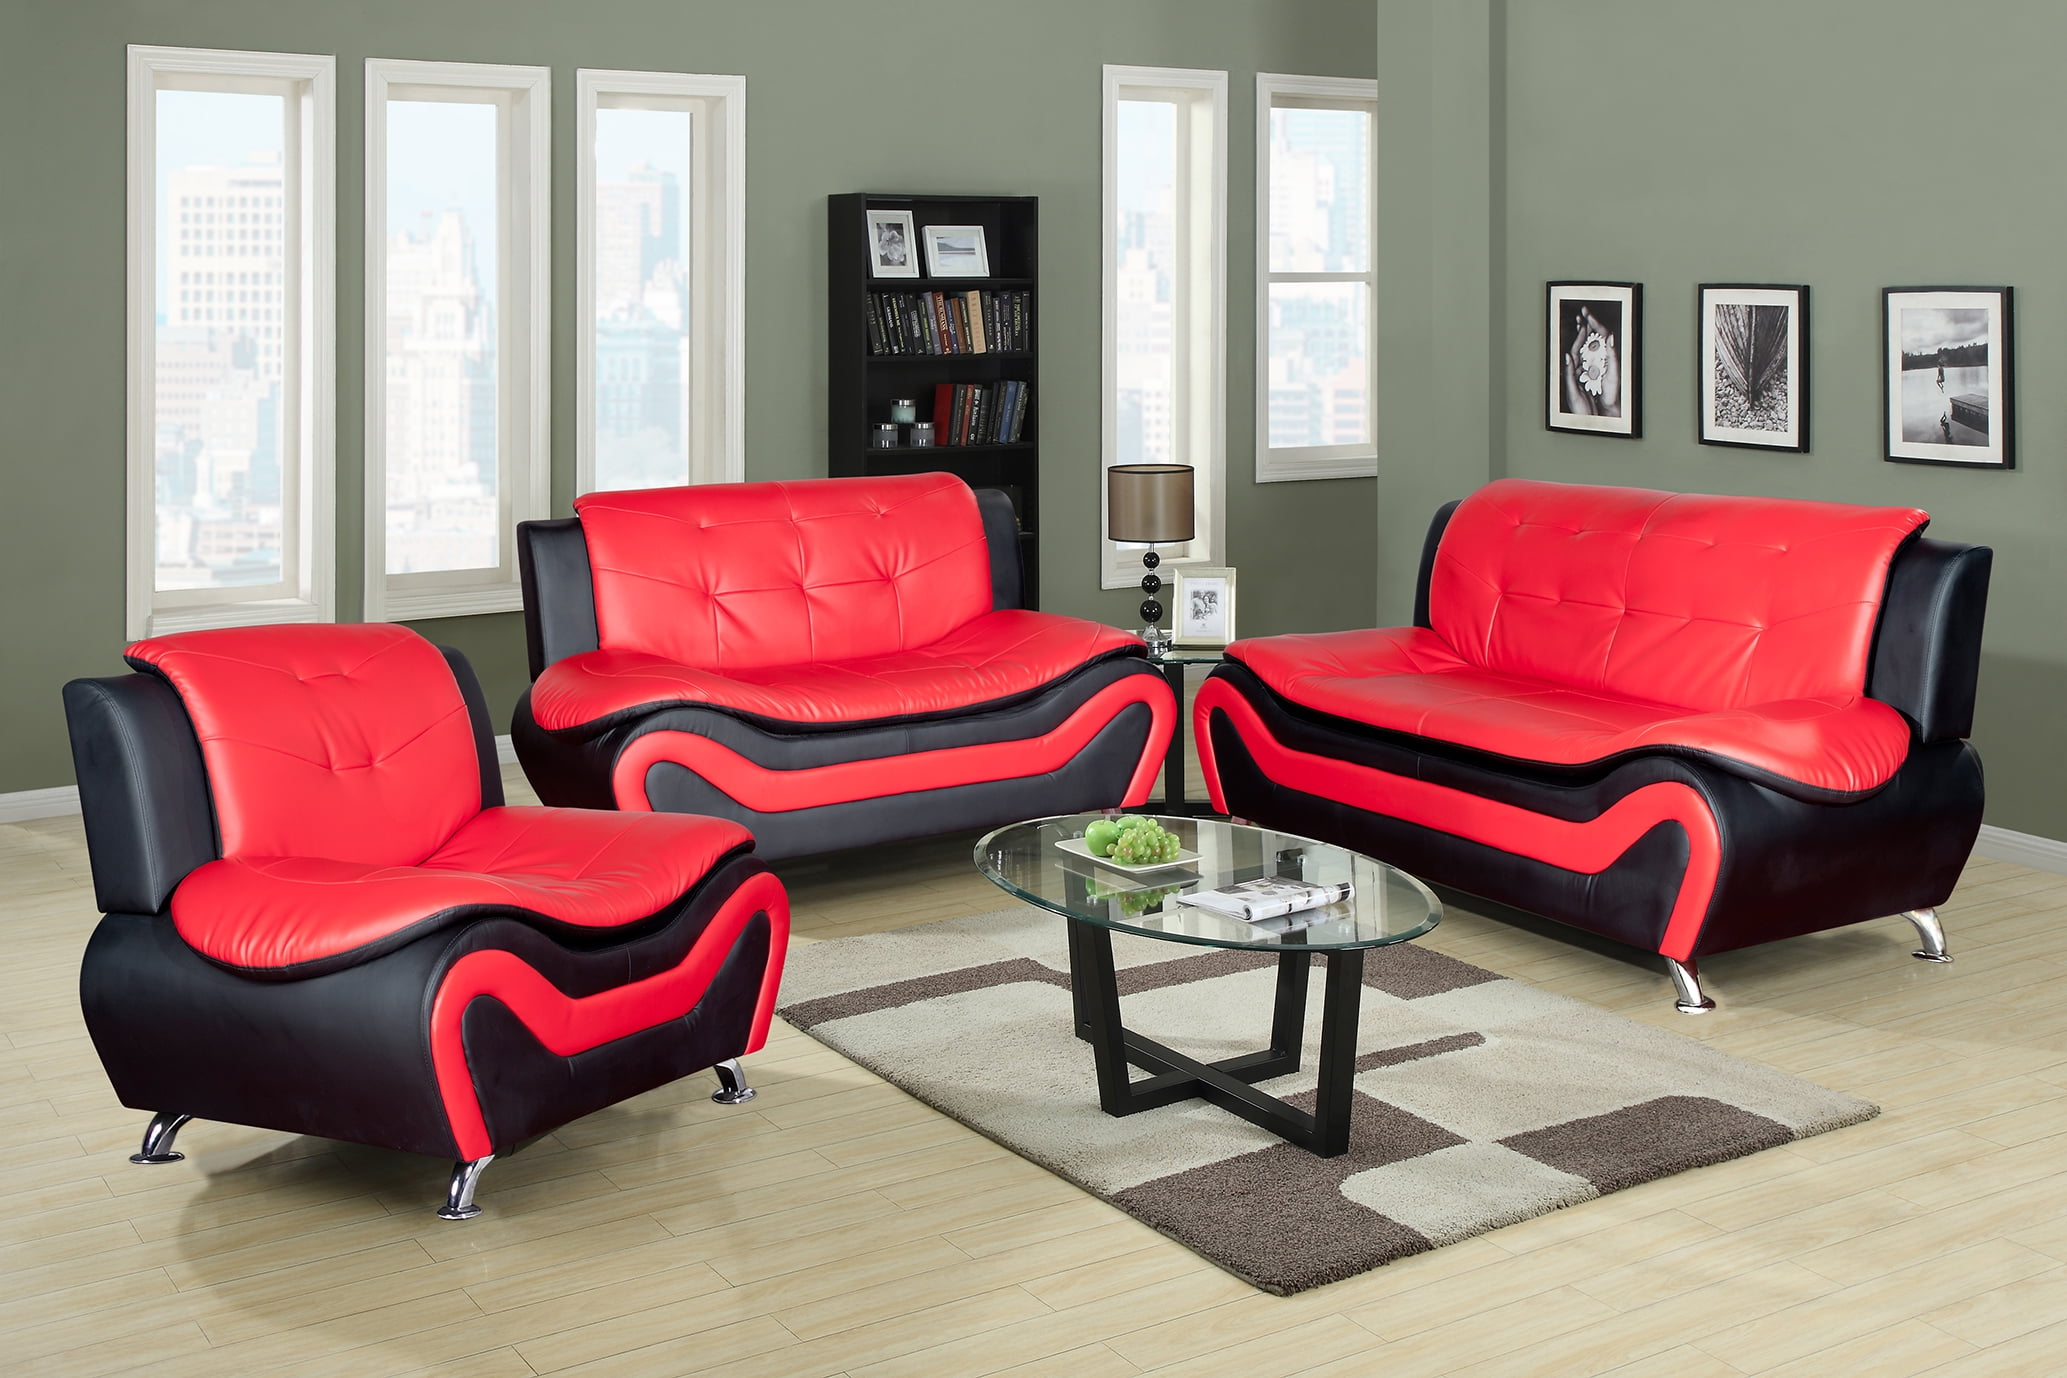 3 Piece Sofa Loveseat Chair Black, Red Leather Sofa And Chair Set